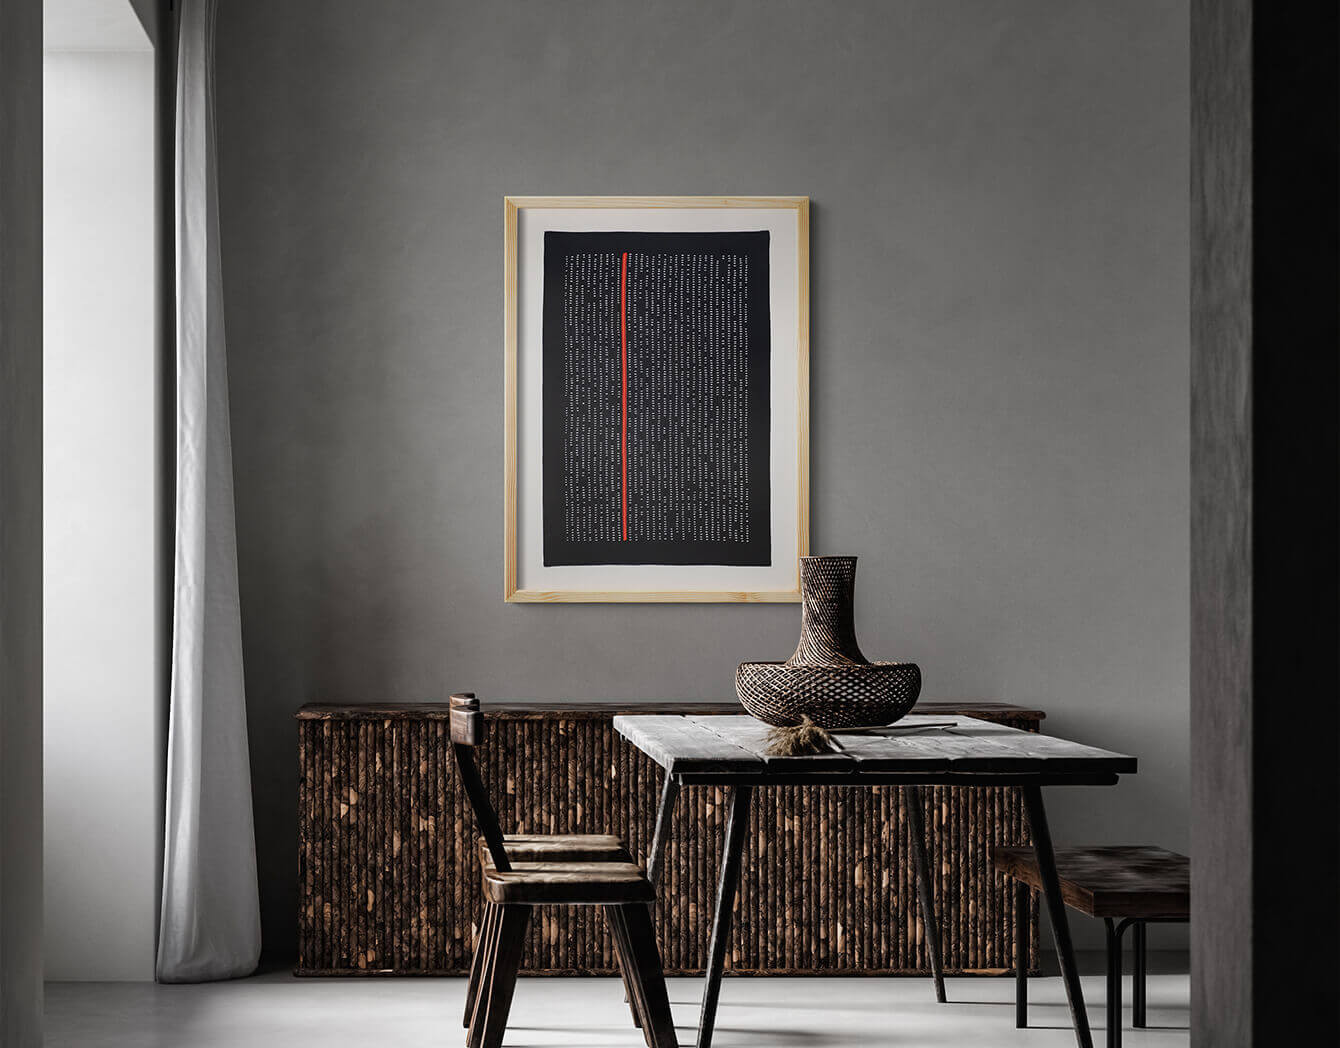 A chic industrial grey dining room exudes contemporary charm, enhanced by the presence of the framed textile artwork 'Meet you after midnight.' The captivating blend of kantha embroidery and abstract design adds an artistic touch.